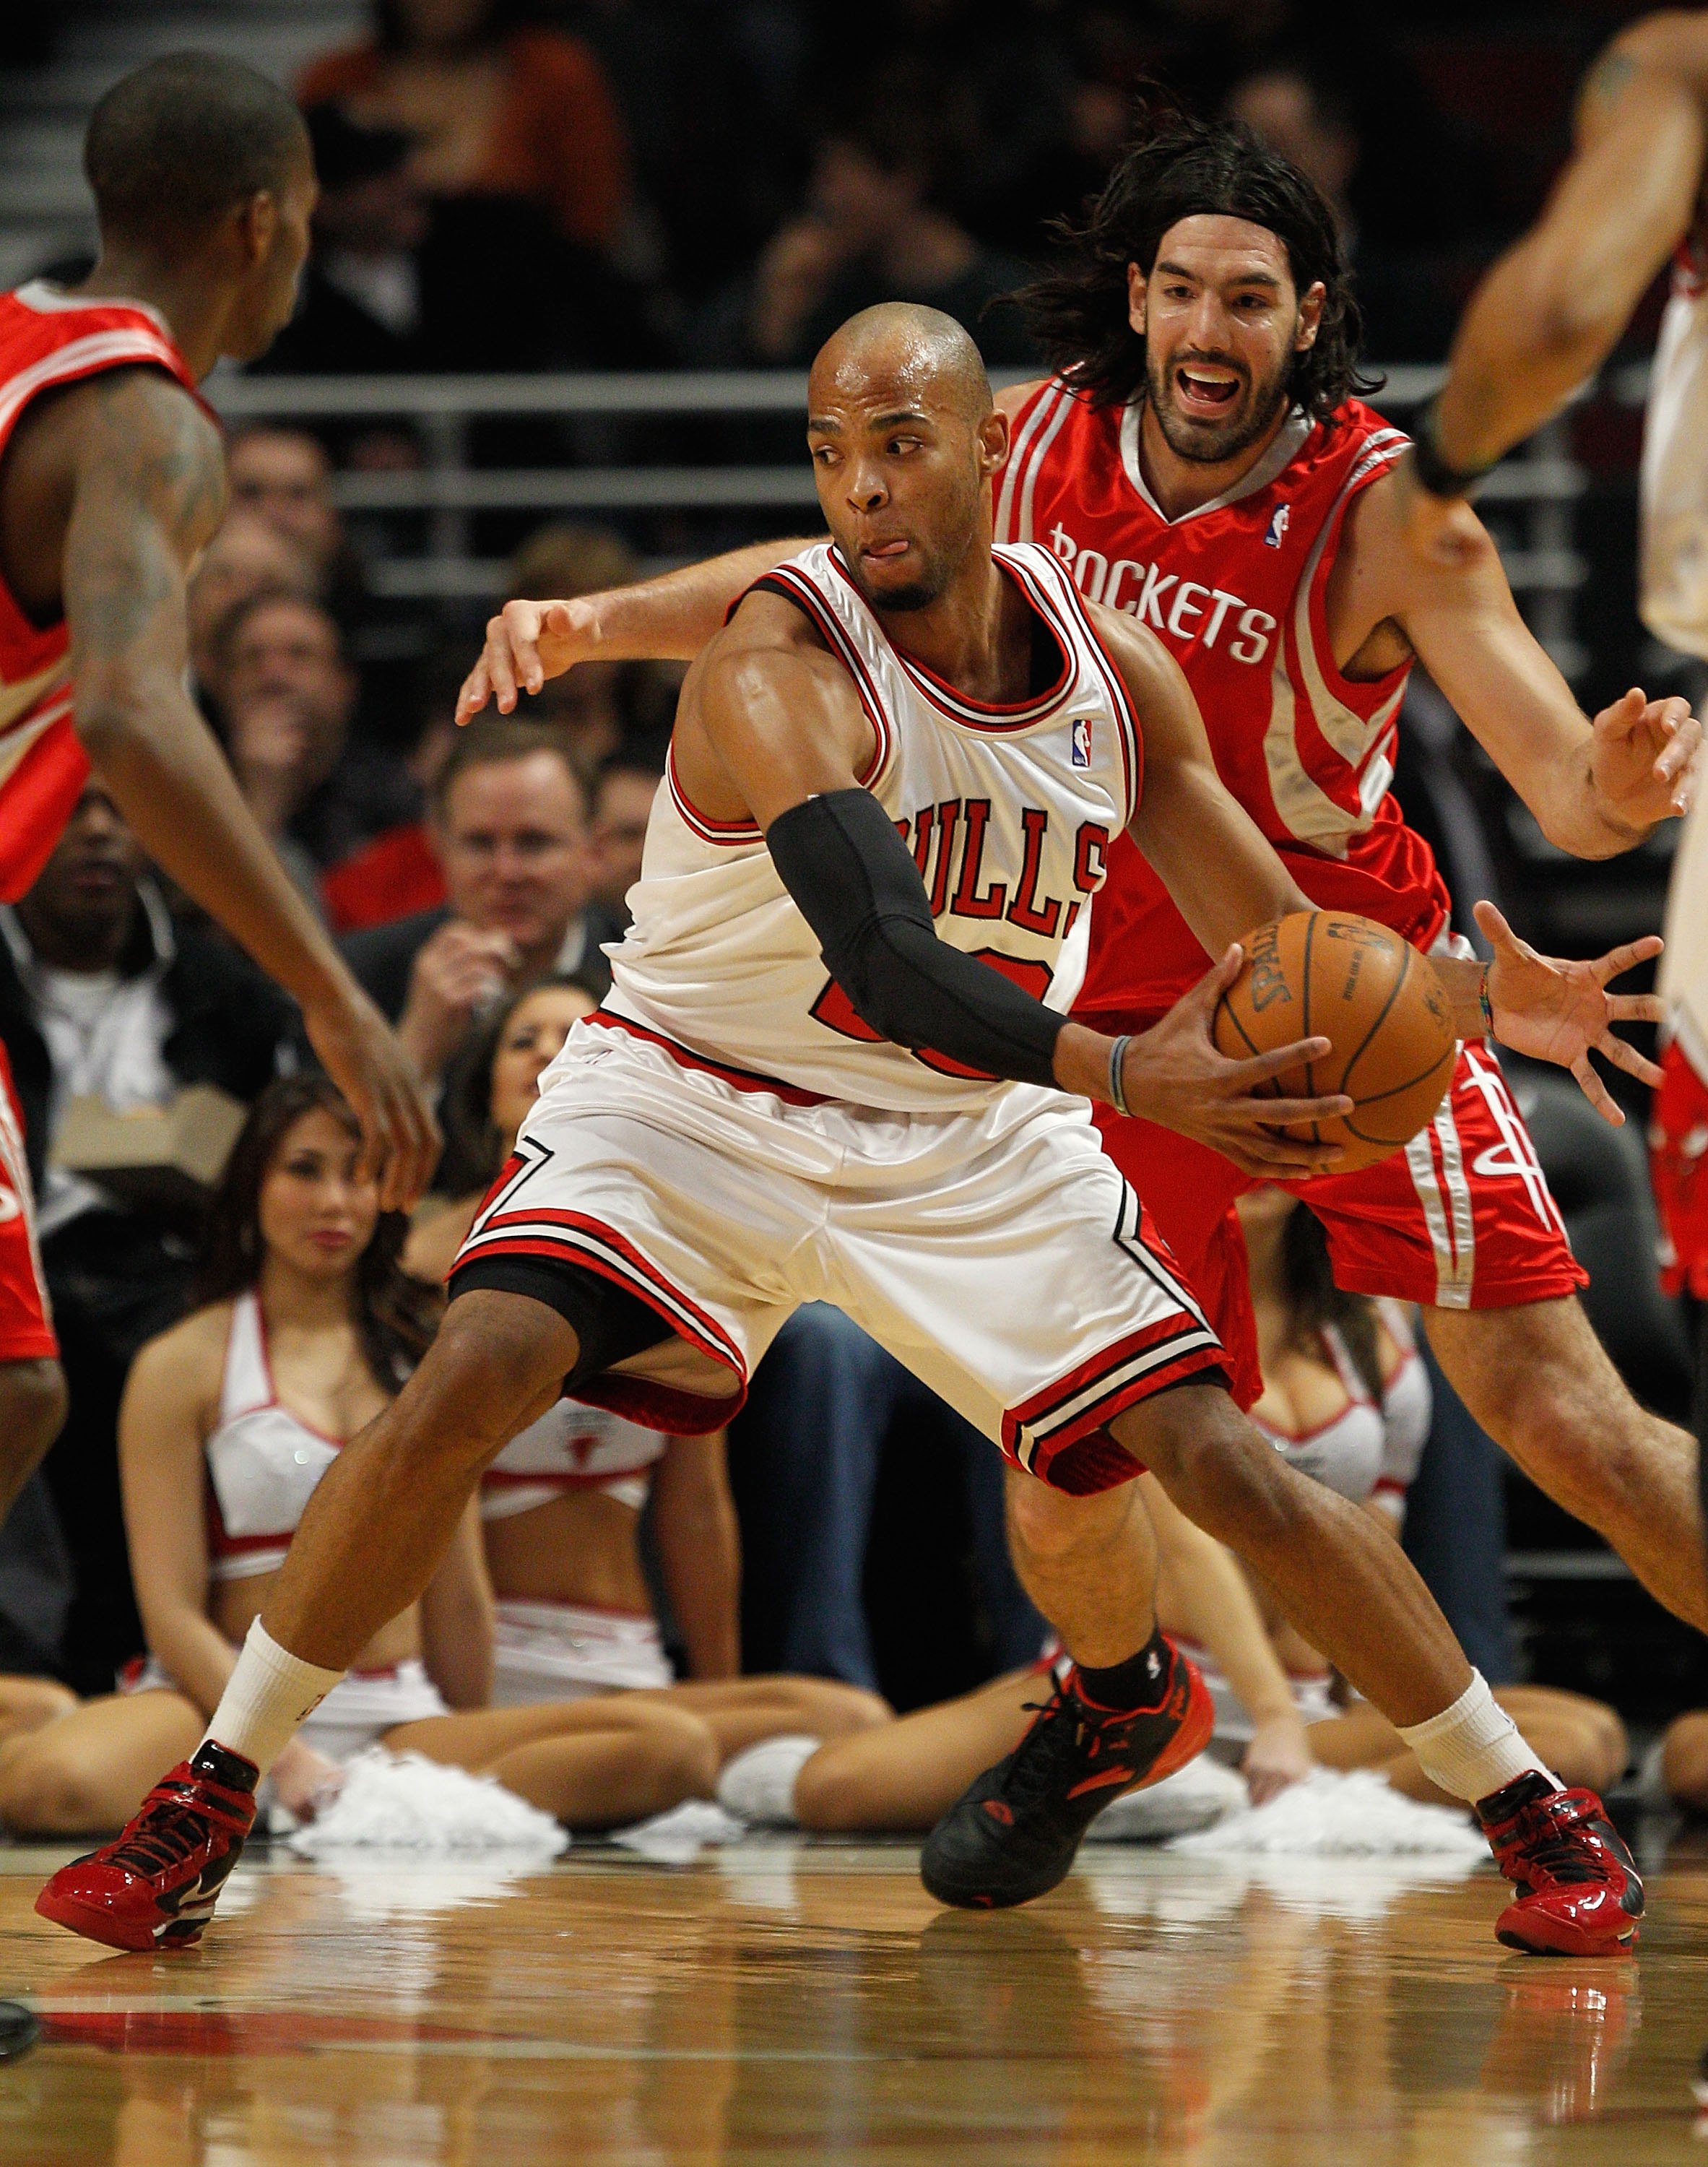 CHICAGO - MARCH 22: Taj Gibson #22 of the Chicago Bulls moves past Luis Scola #4 of the Houston Rockets at the United Center on March 22, 2010 in Chicago, Illinois. The Bulls defeated the Rockets 98-88. NOTE TO USER: User expressly acknowledges and agrees